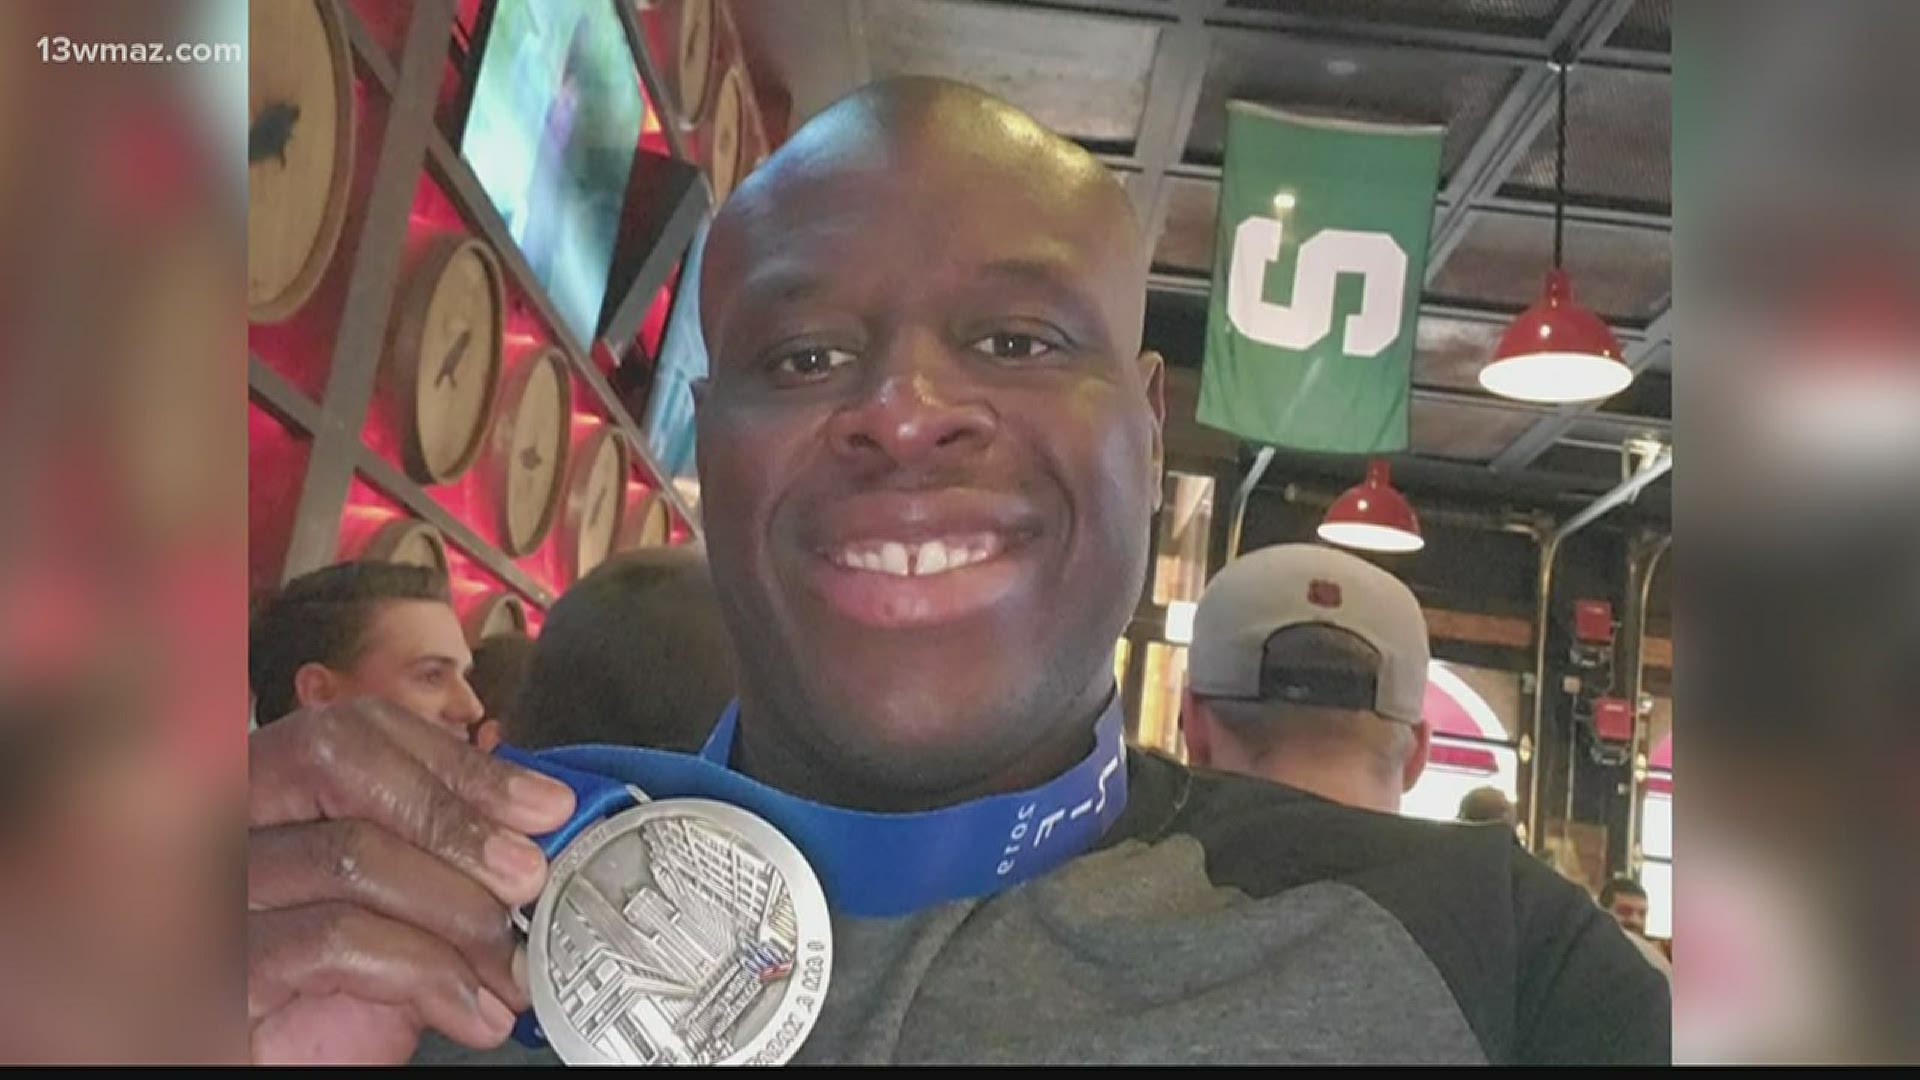 Jerome Owens has been a runner for the past 6 years, challenging himself and evolving from 5Ks to full marathons, becoming a part of the '1% Club.'